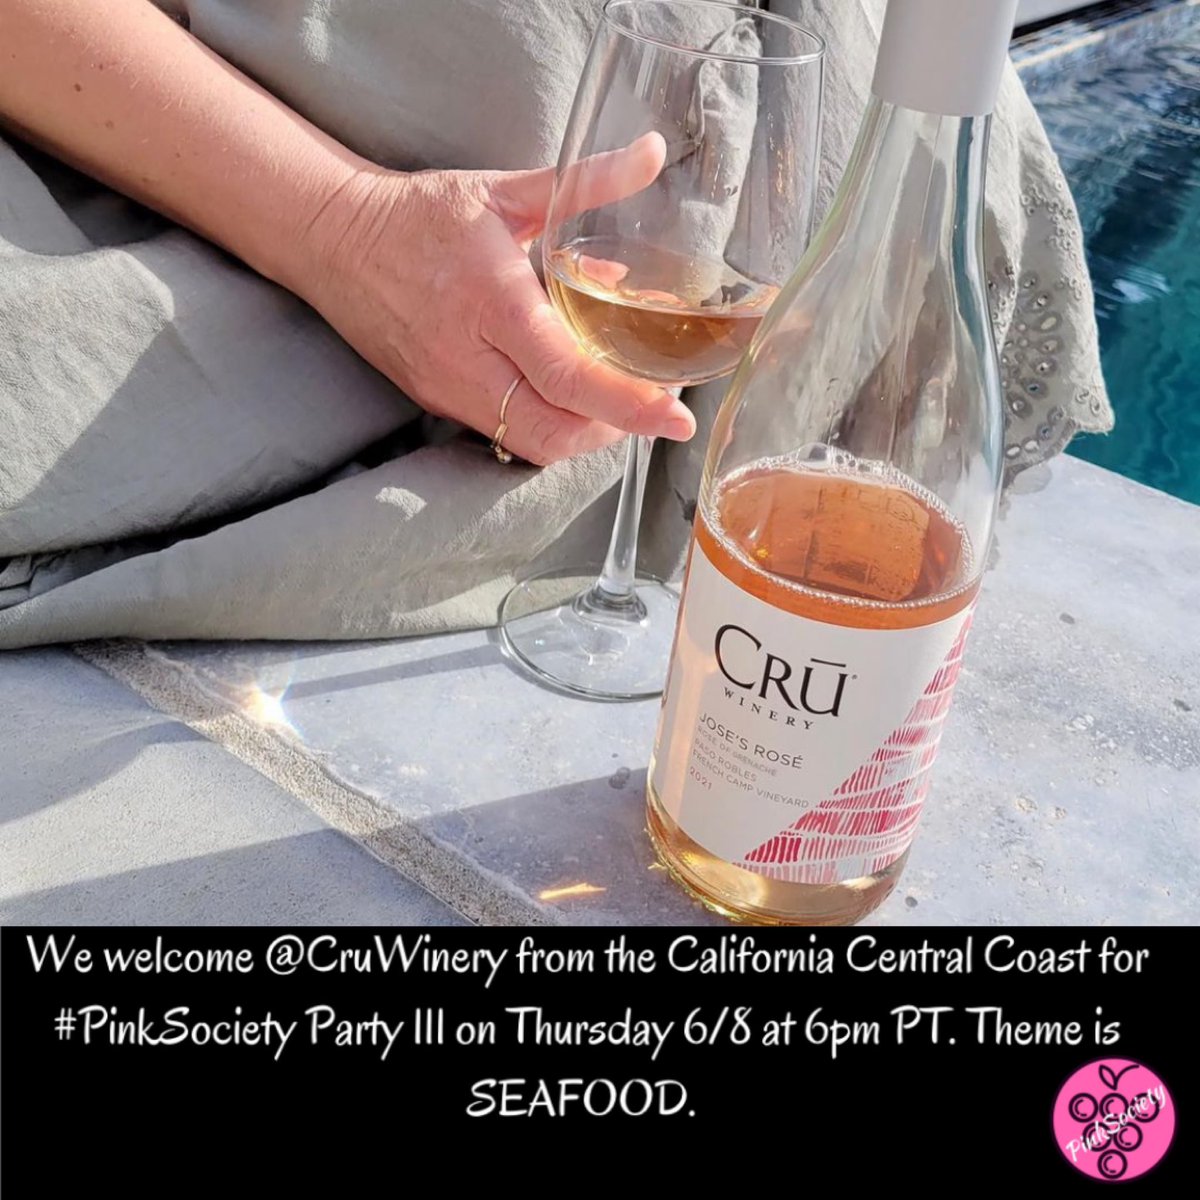 We are all full up if Seafood photos, thanks to everyone who submitted one. We welcome @CruWinery from the California Central Coast for #PinkSociety Party 111 on Thursday 6/8 at 6pm PT. Theme is SEAFOOD. @boozychef @jflorez @winedivaa @WineCheeseFri @RedWineCats @WineOnTheDime